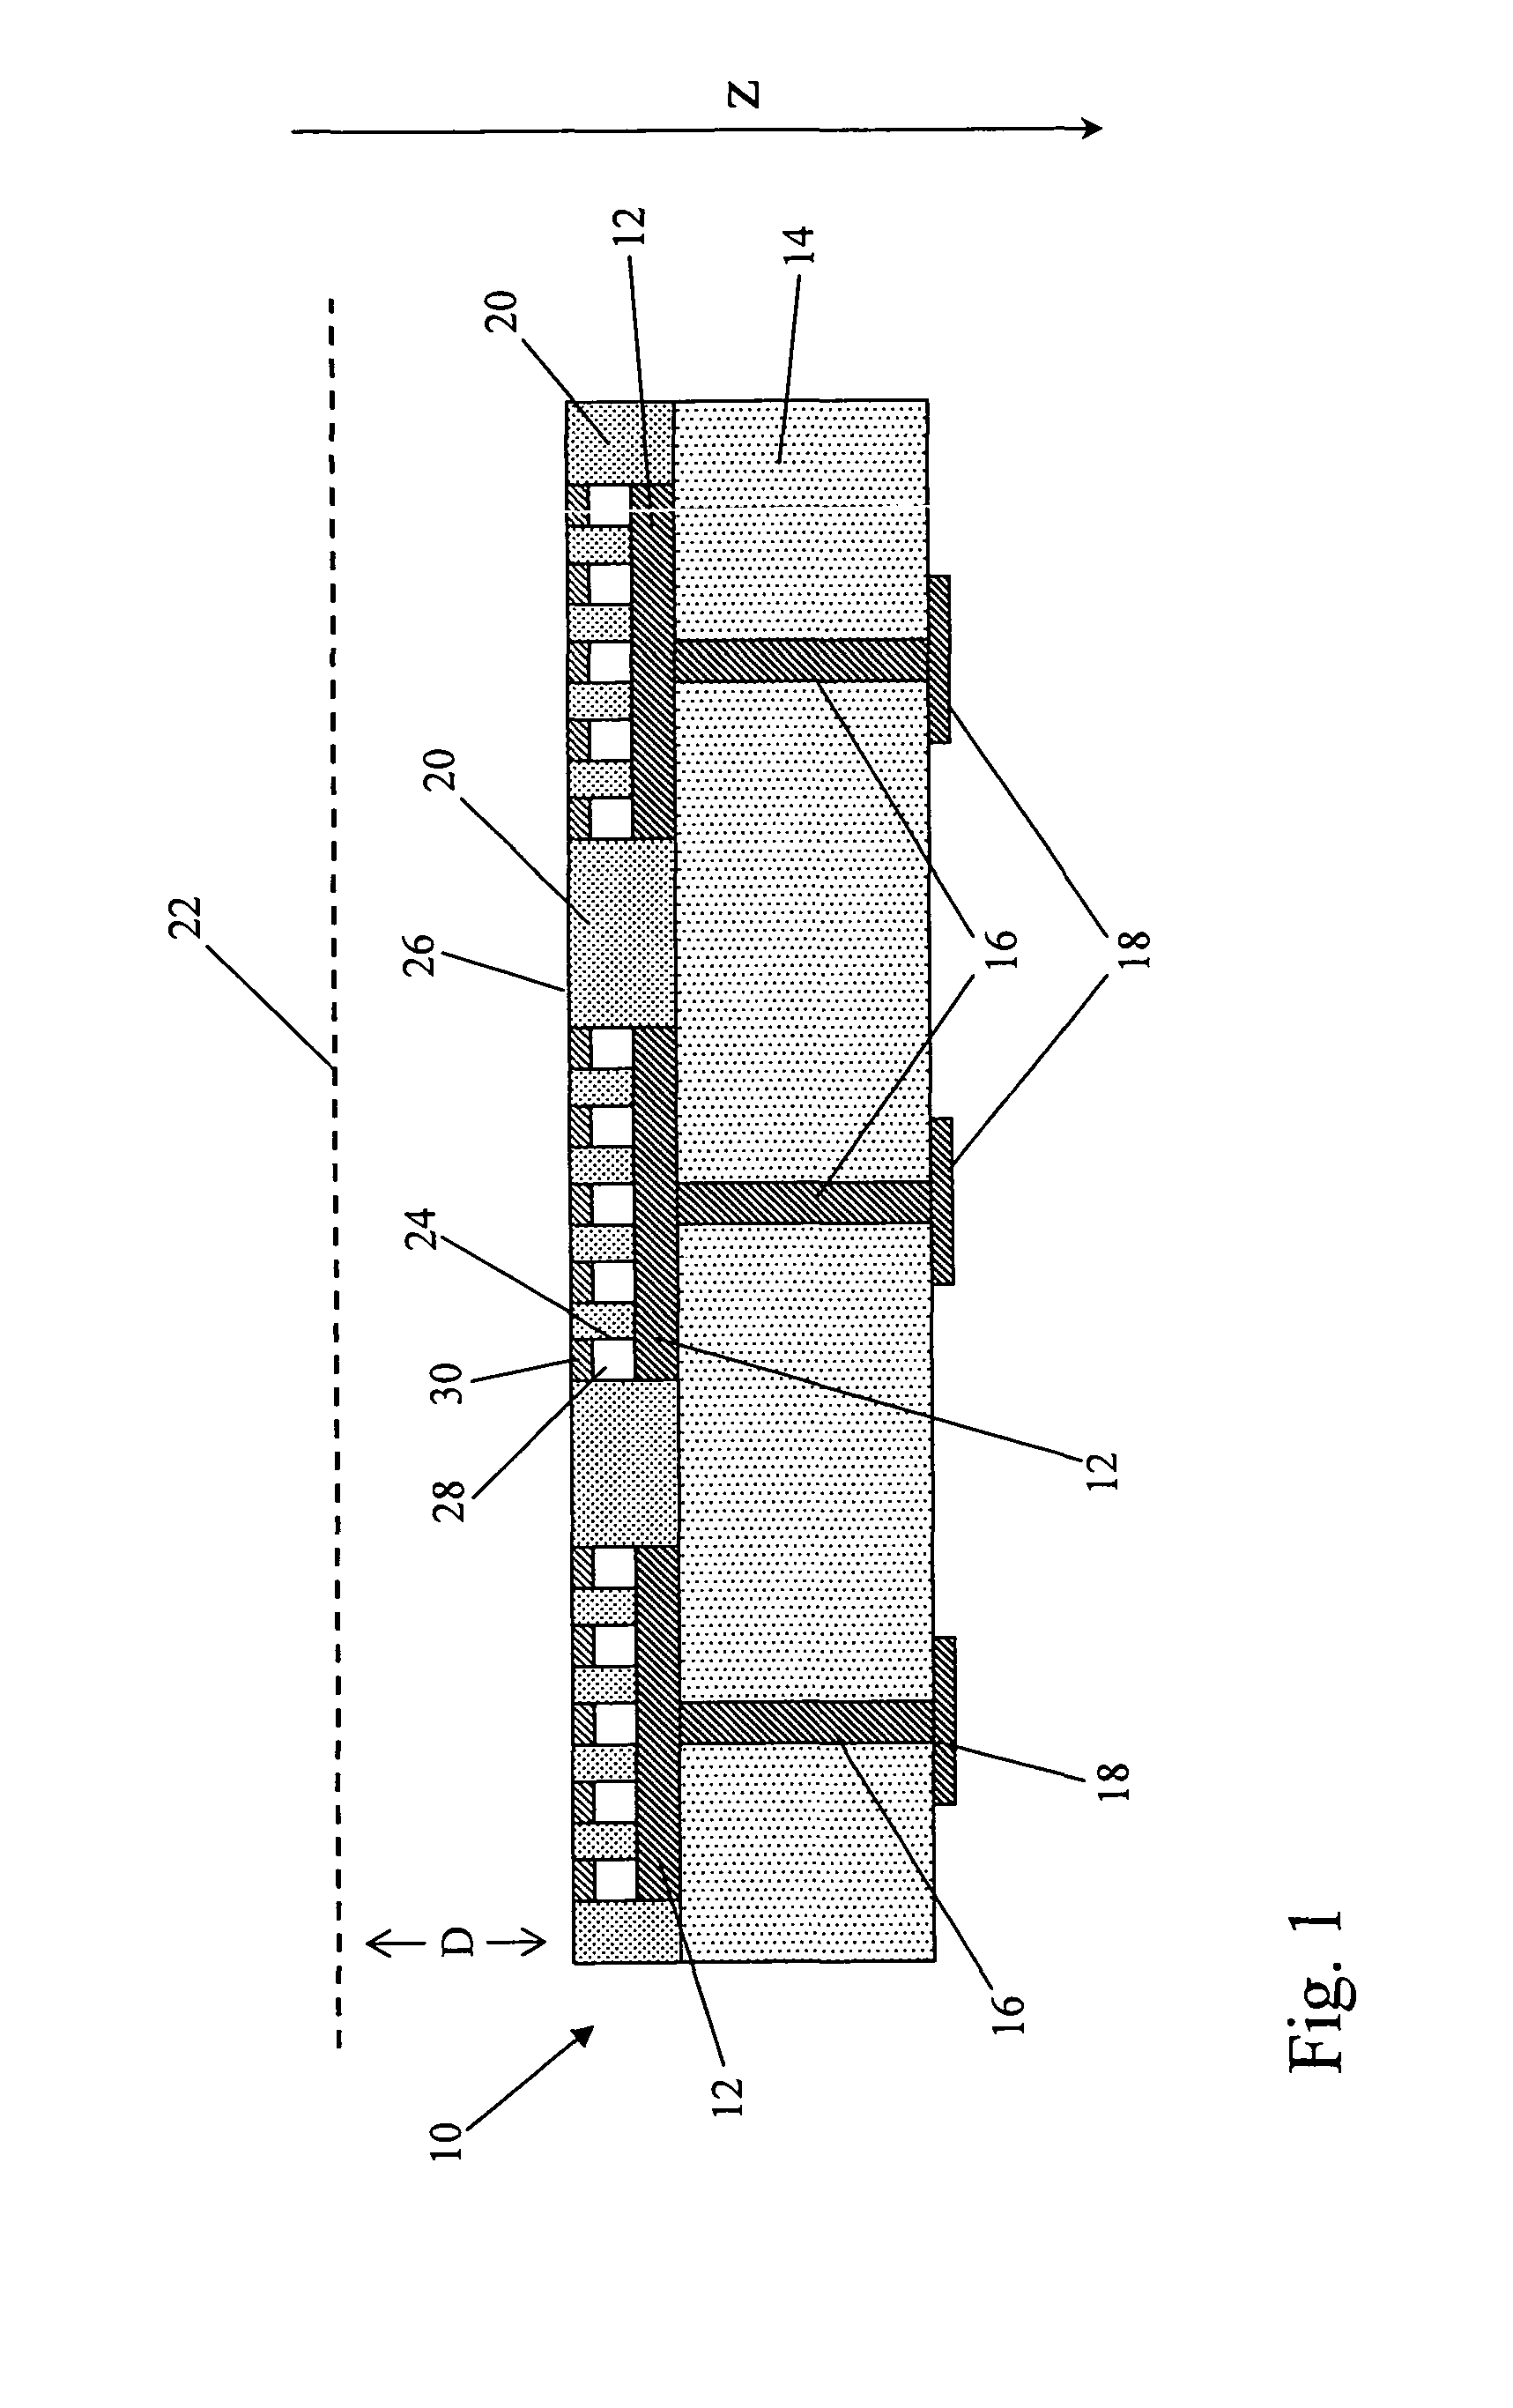 Protected readout electrode assembly